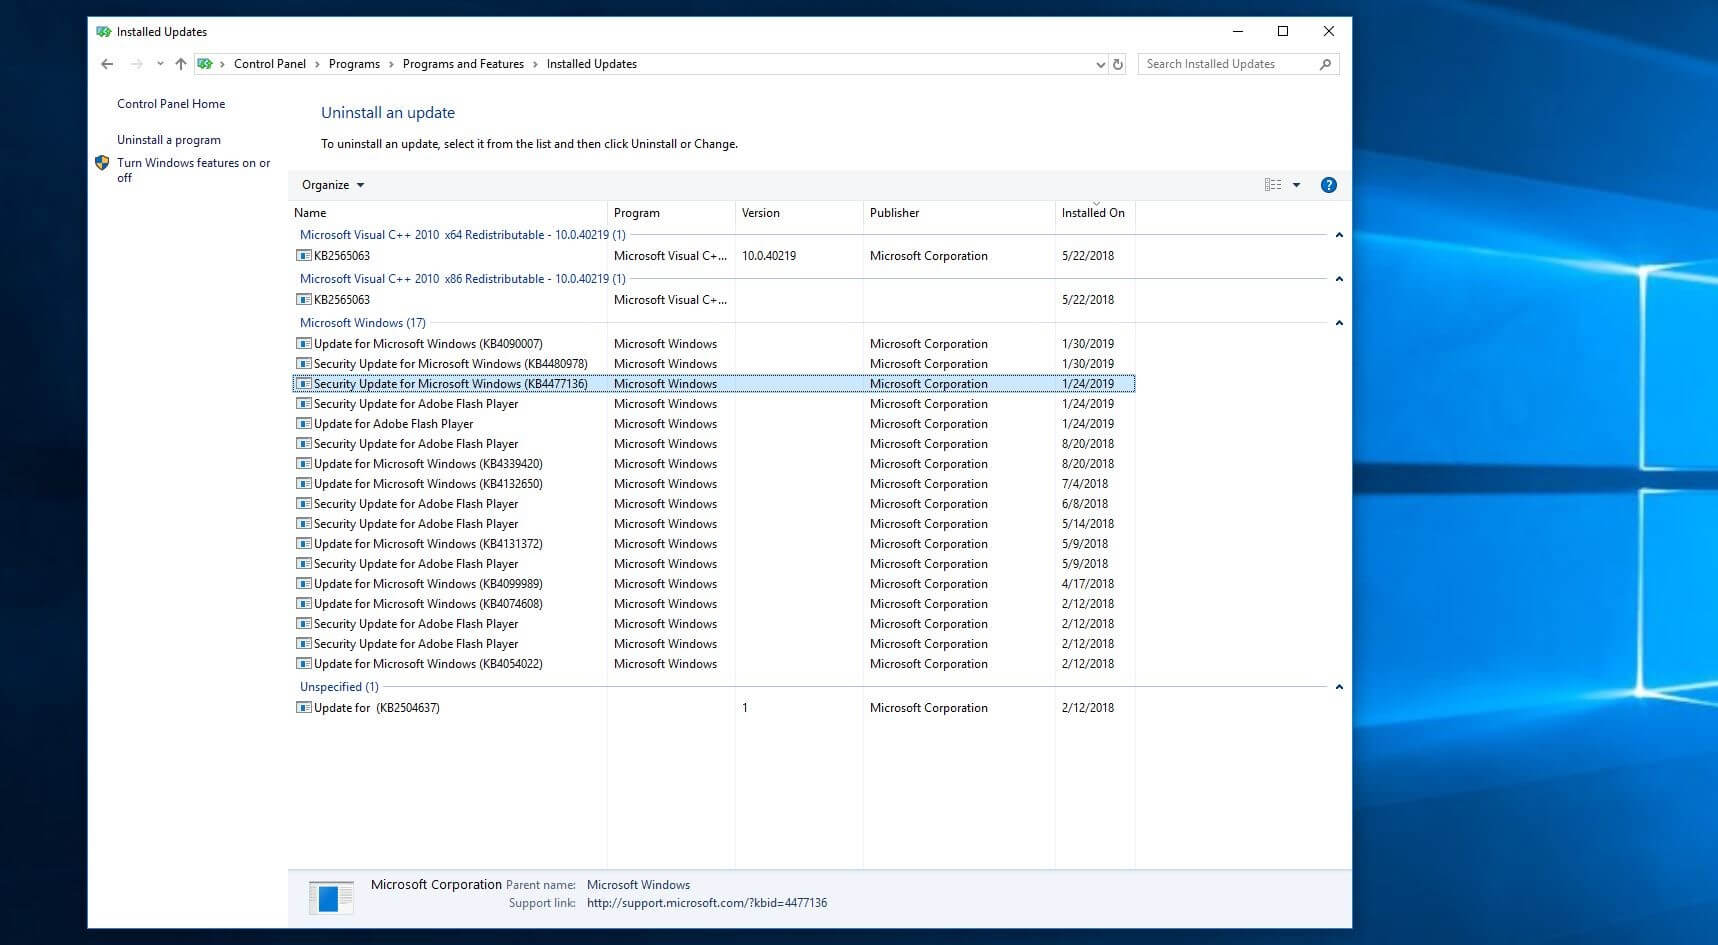 Overview of installed updates in Windows 10